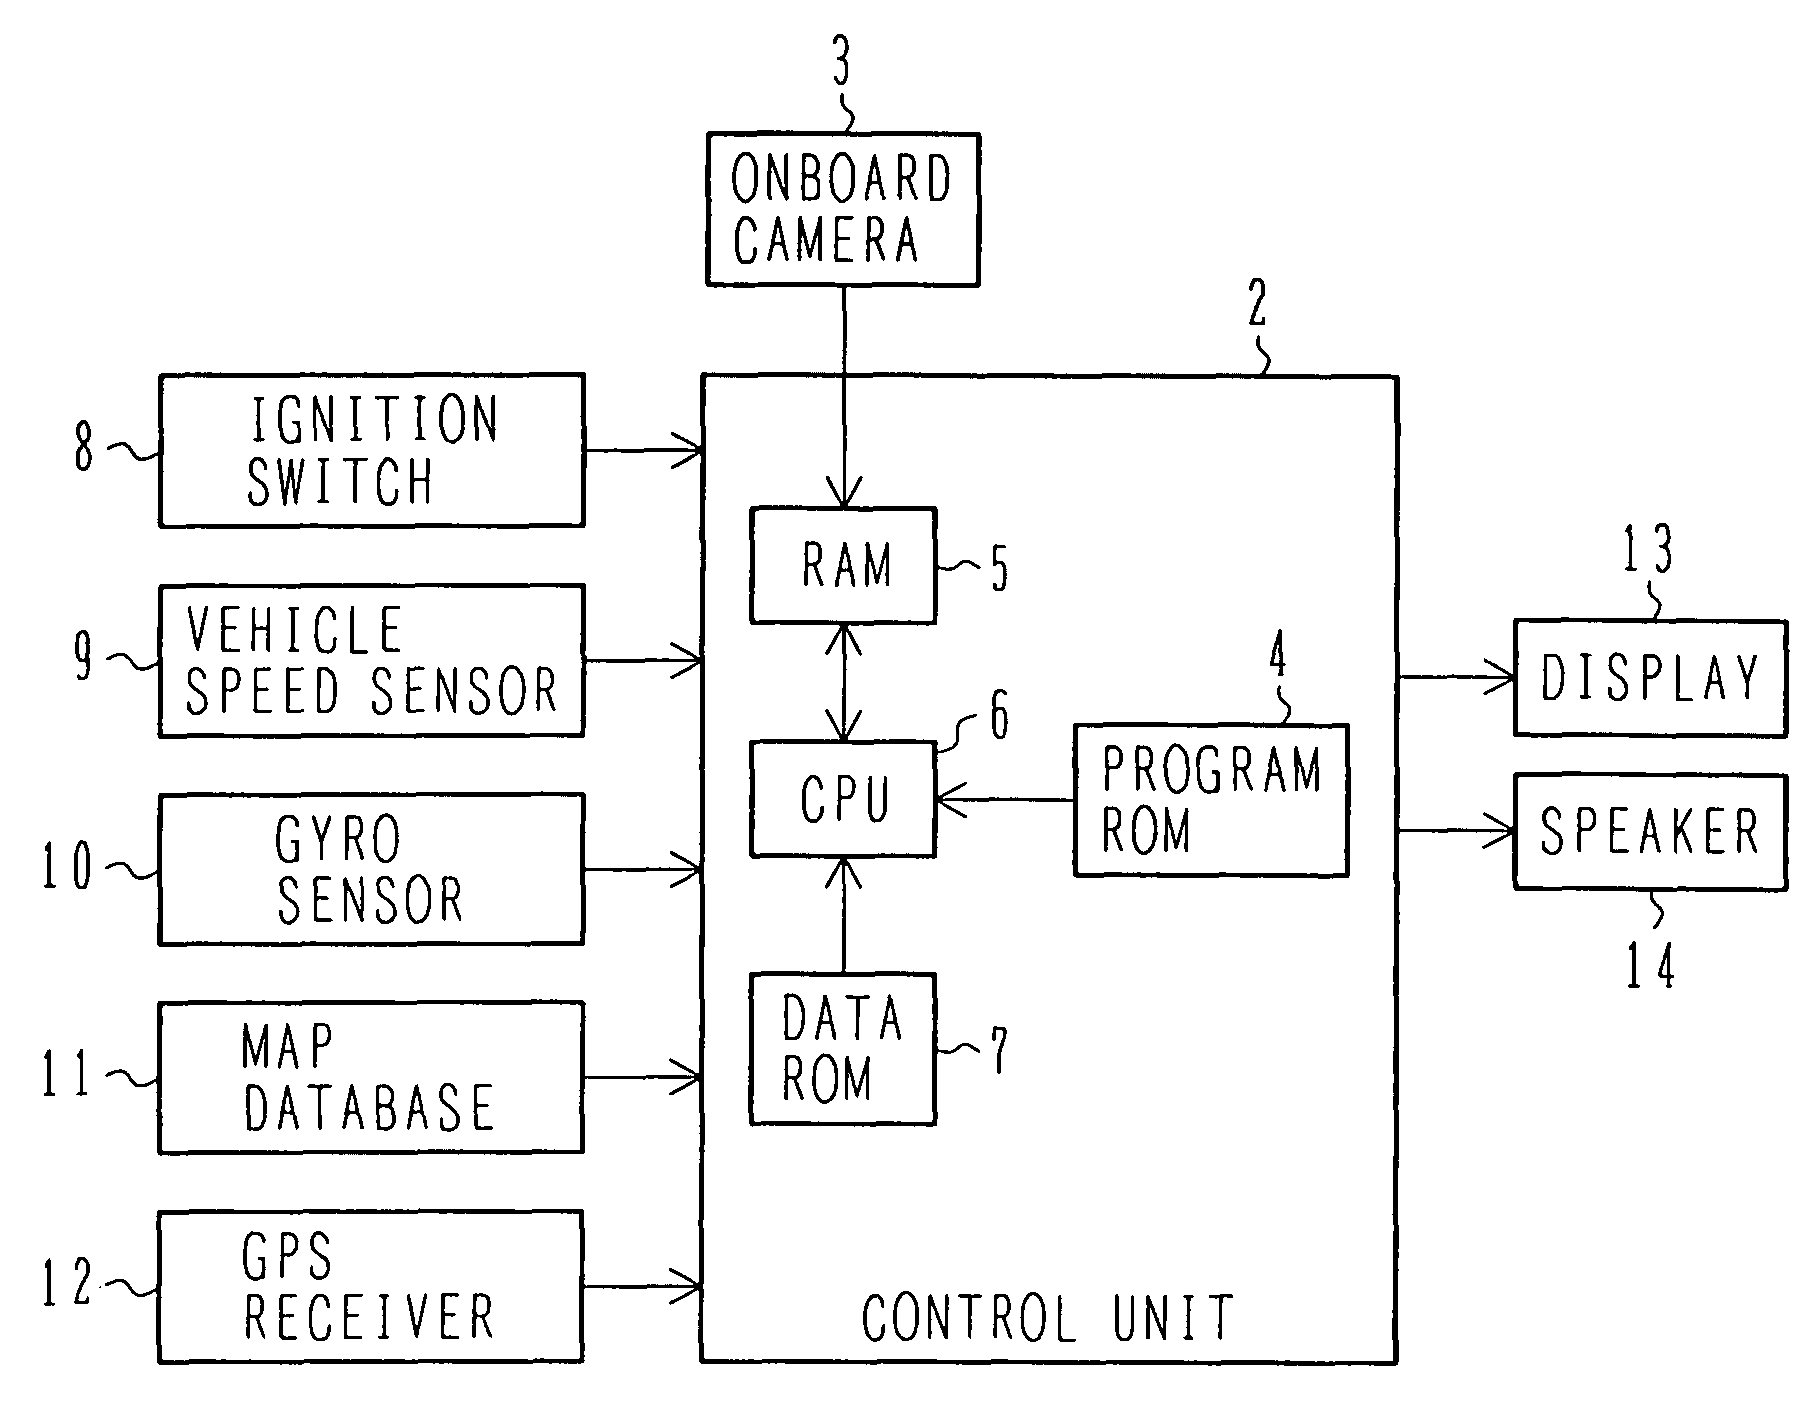 Imaging environment recognition device